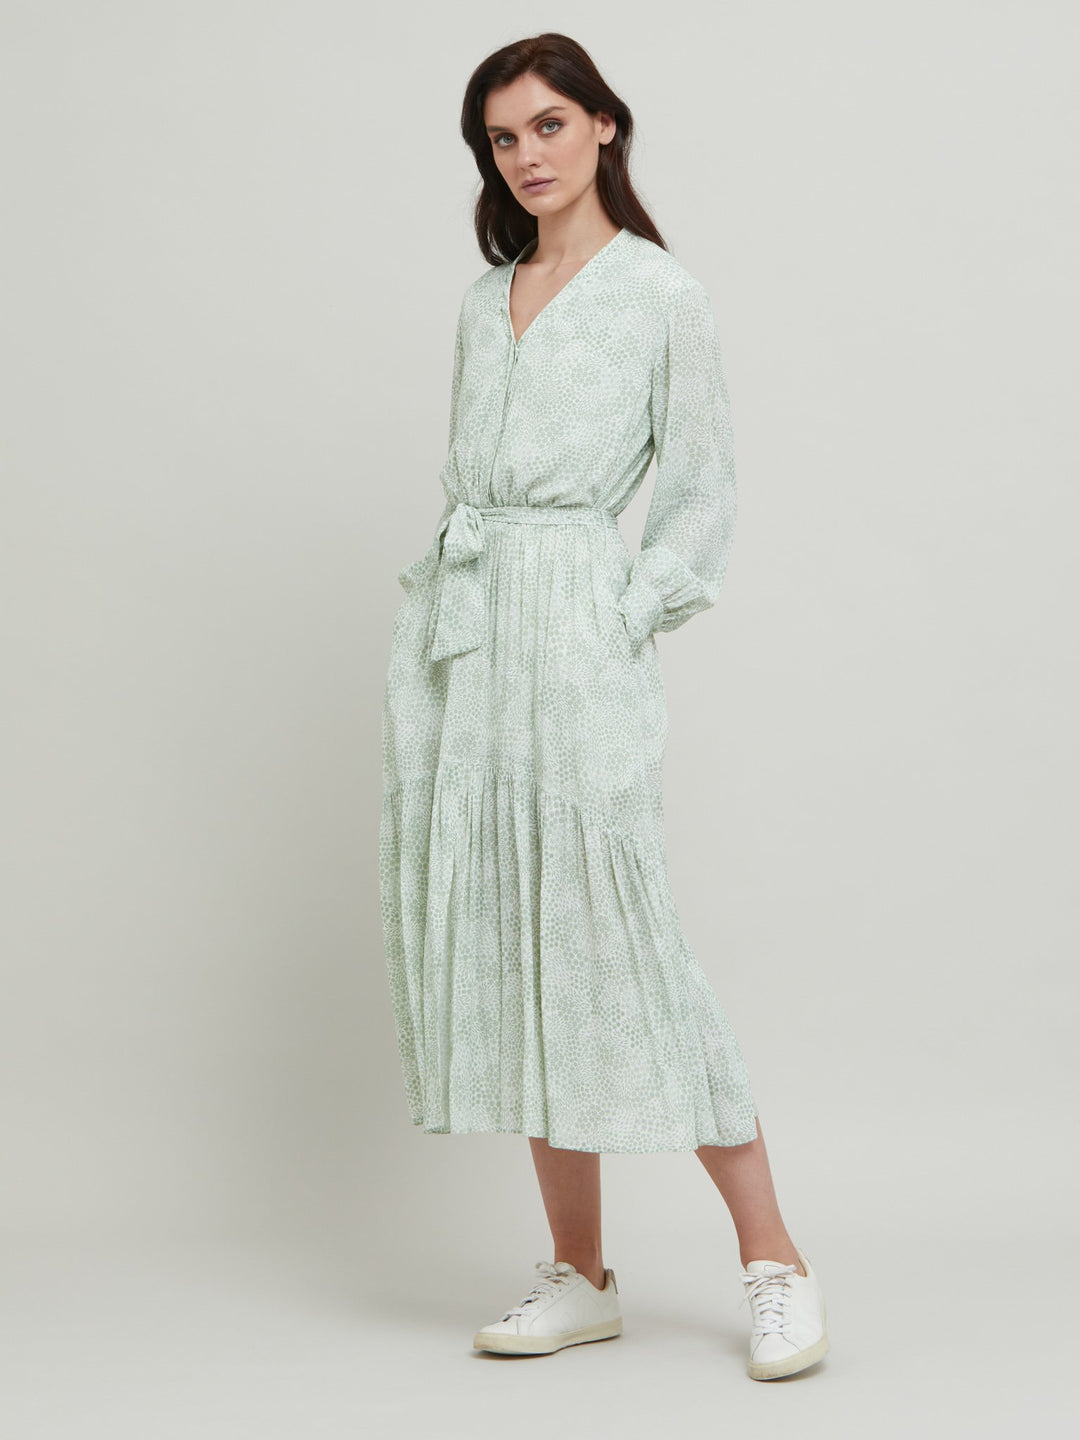 Meet the Martha Dress, a vintage bi-color mini floral in viscose crepe. A softly elasticated waist with a detachable belt, long-sleeved and flattering fluid bohemian tiered skirt with center front slit & V-neck. Relaxed elegance for everyday life.